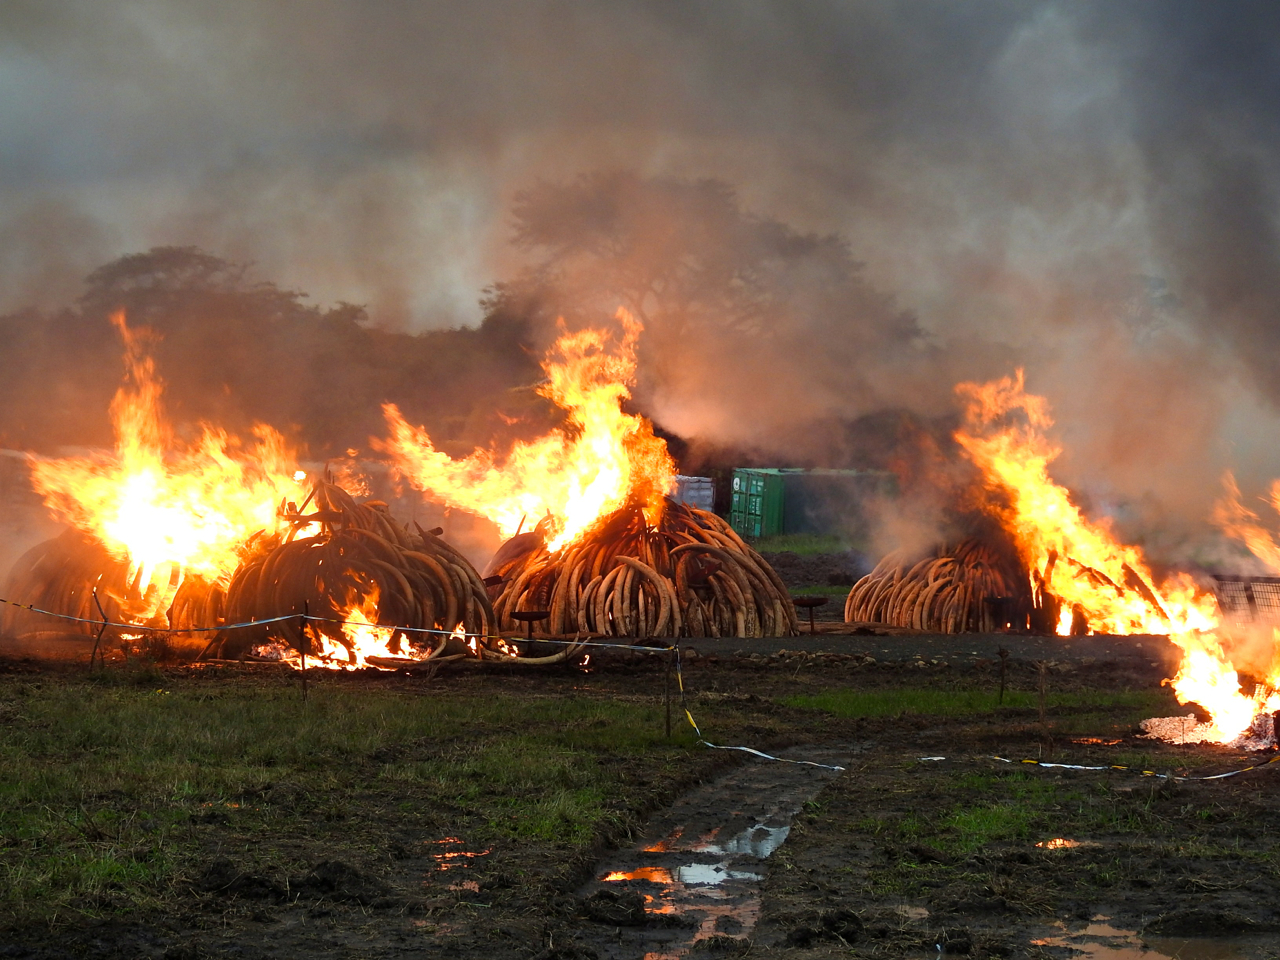 Ivory - To burn or not to burn? by Chris Huxley